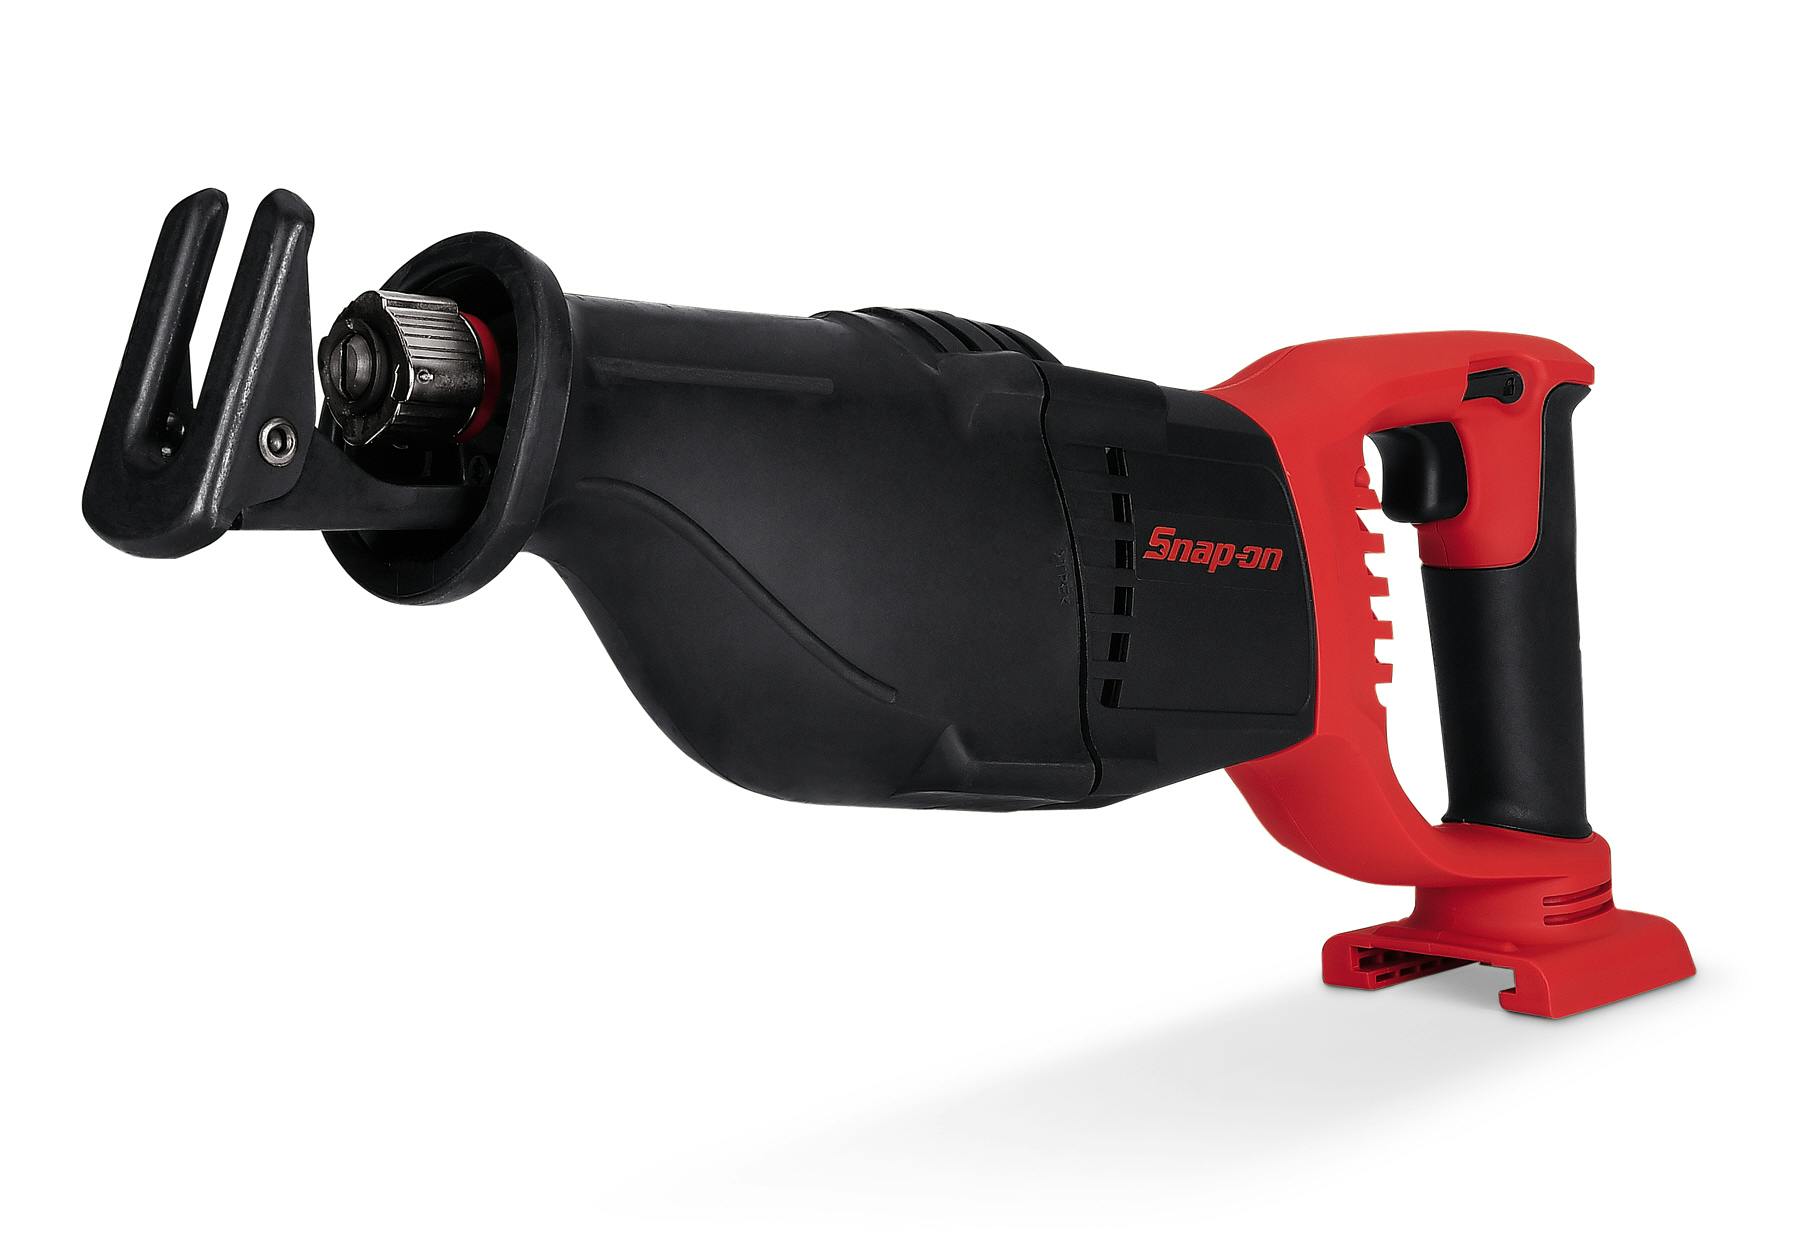 18 V MonsterLithium Cordless Reciprocating Saw (Tool Only) (Red 